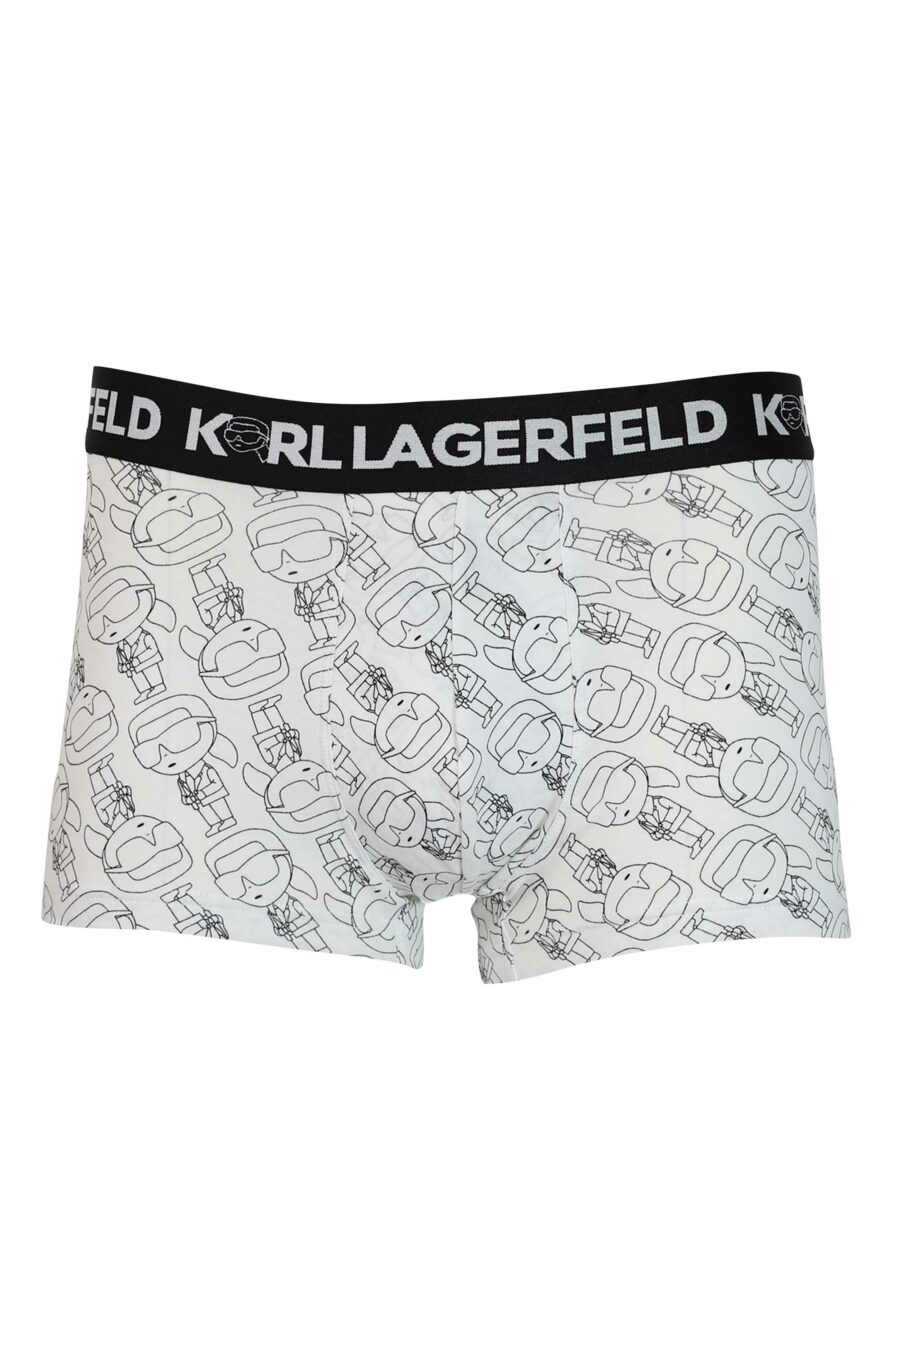 Pack of three black boxers with different "karl" prints - 8720744054580 3